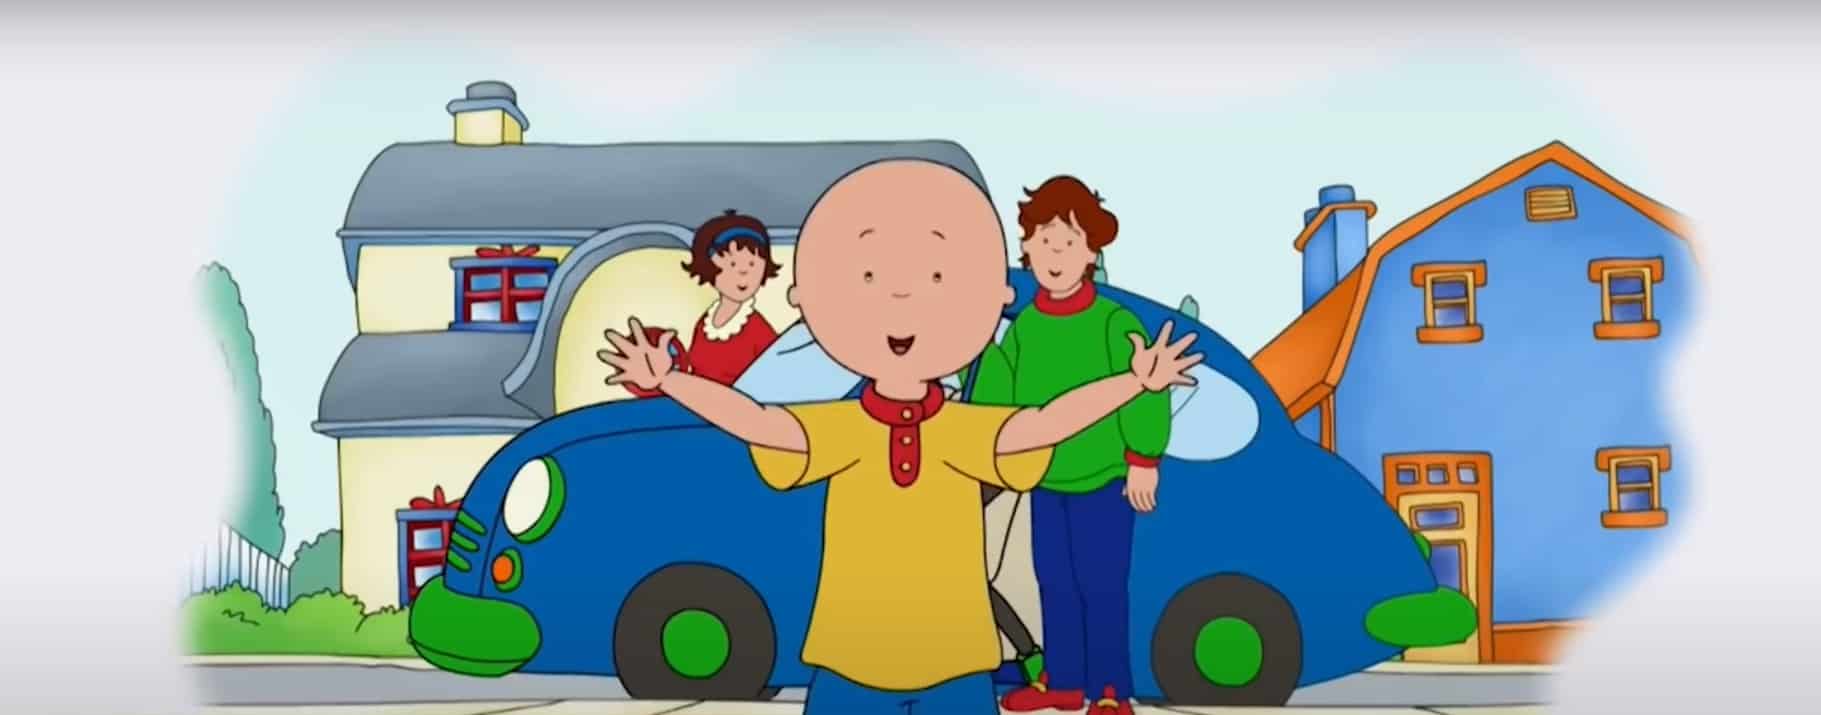 Why was caillou cancelled 1 2